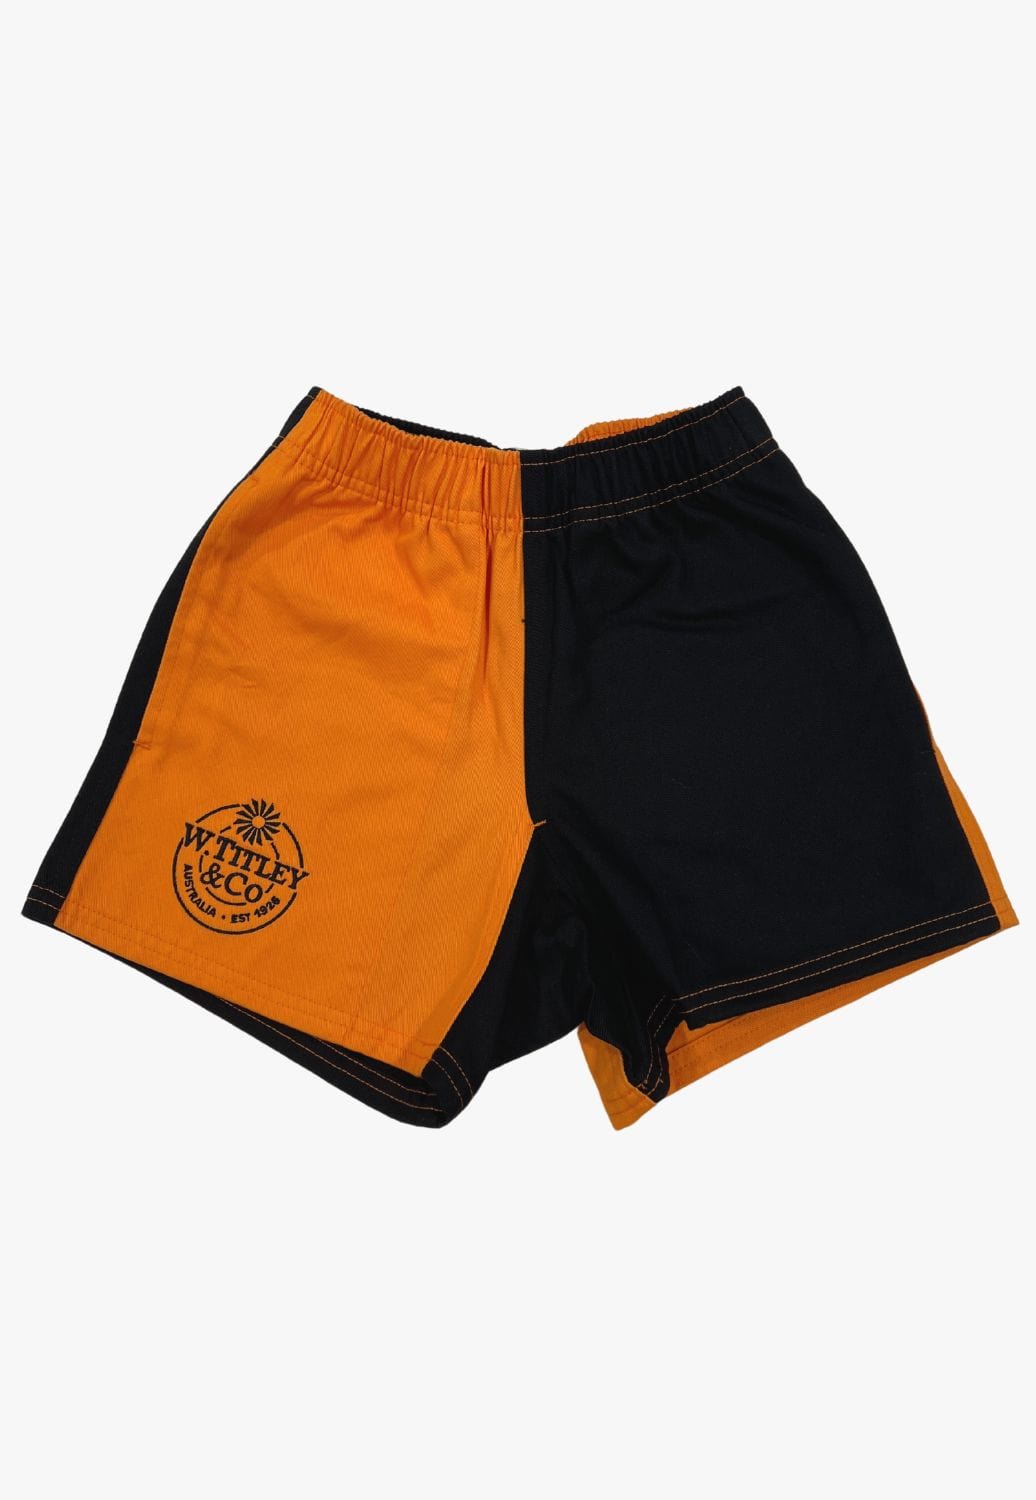 W. Titley and Co CLOTHING-Boys Shorts W. Titley & Co Junior Rugger Short